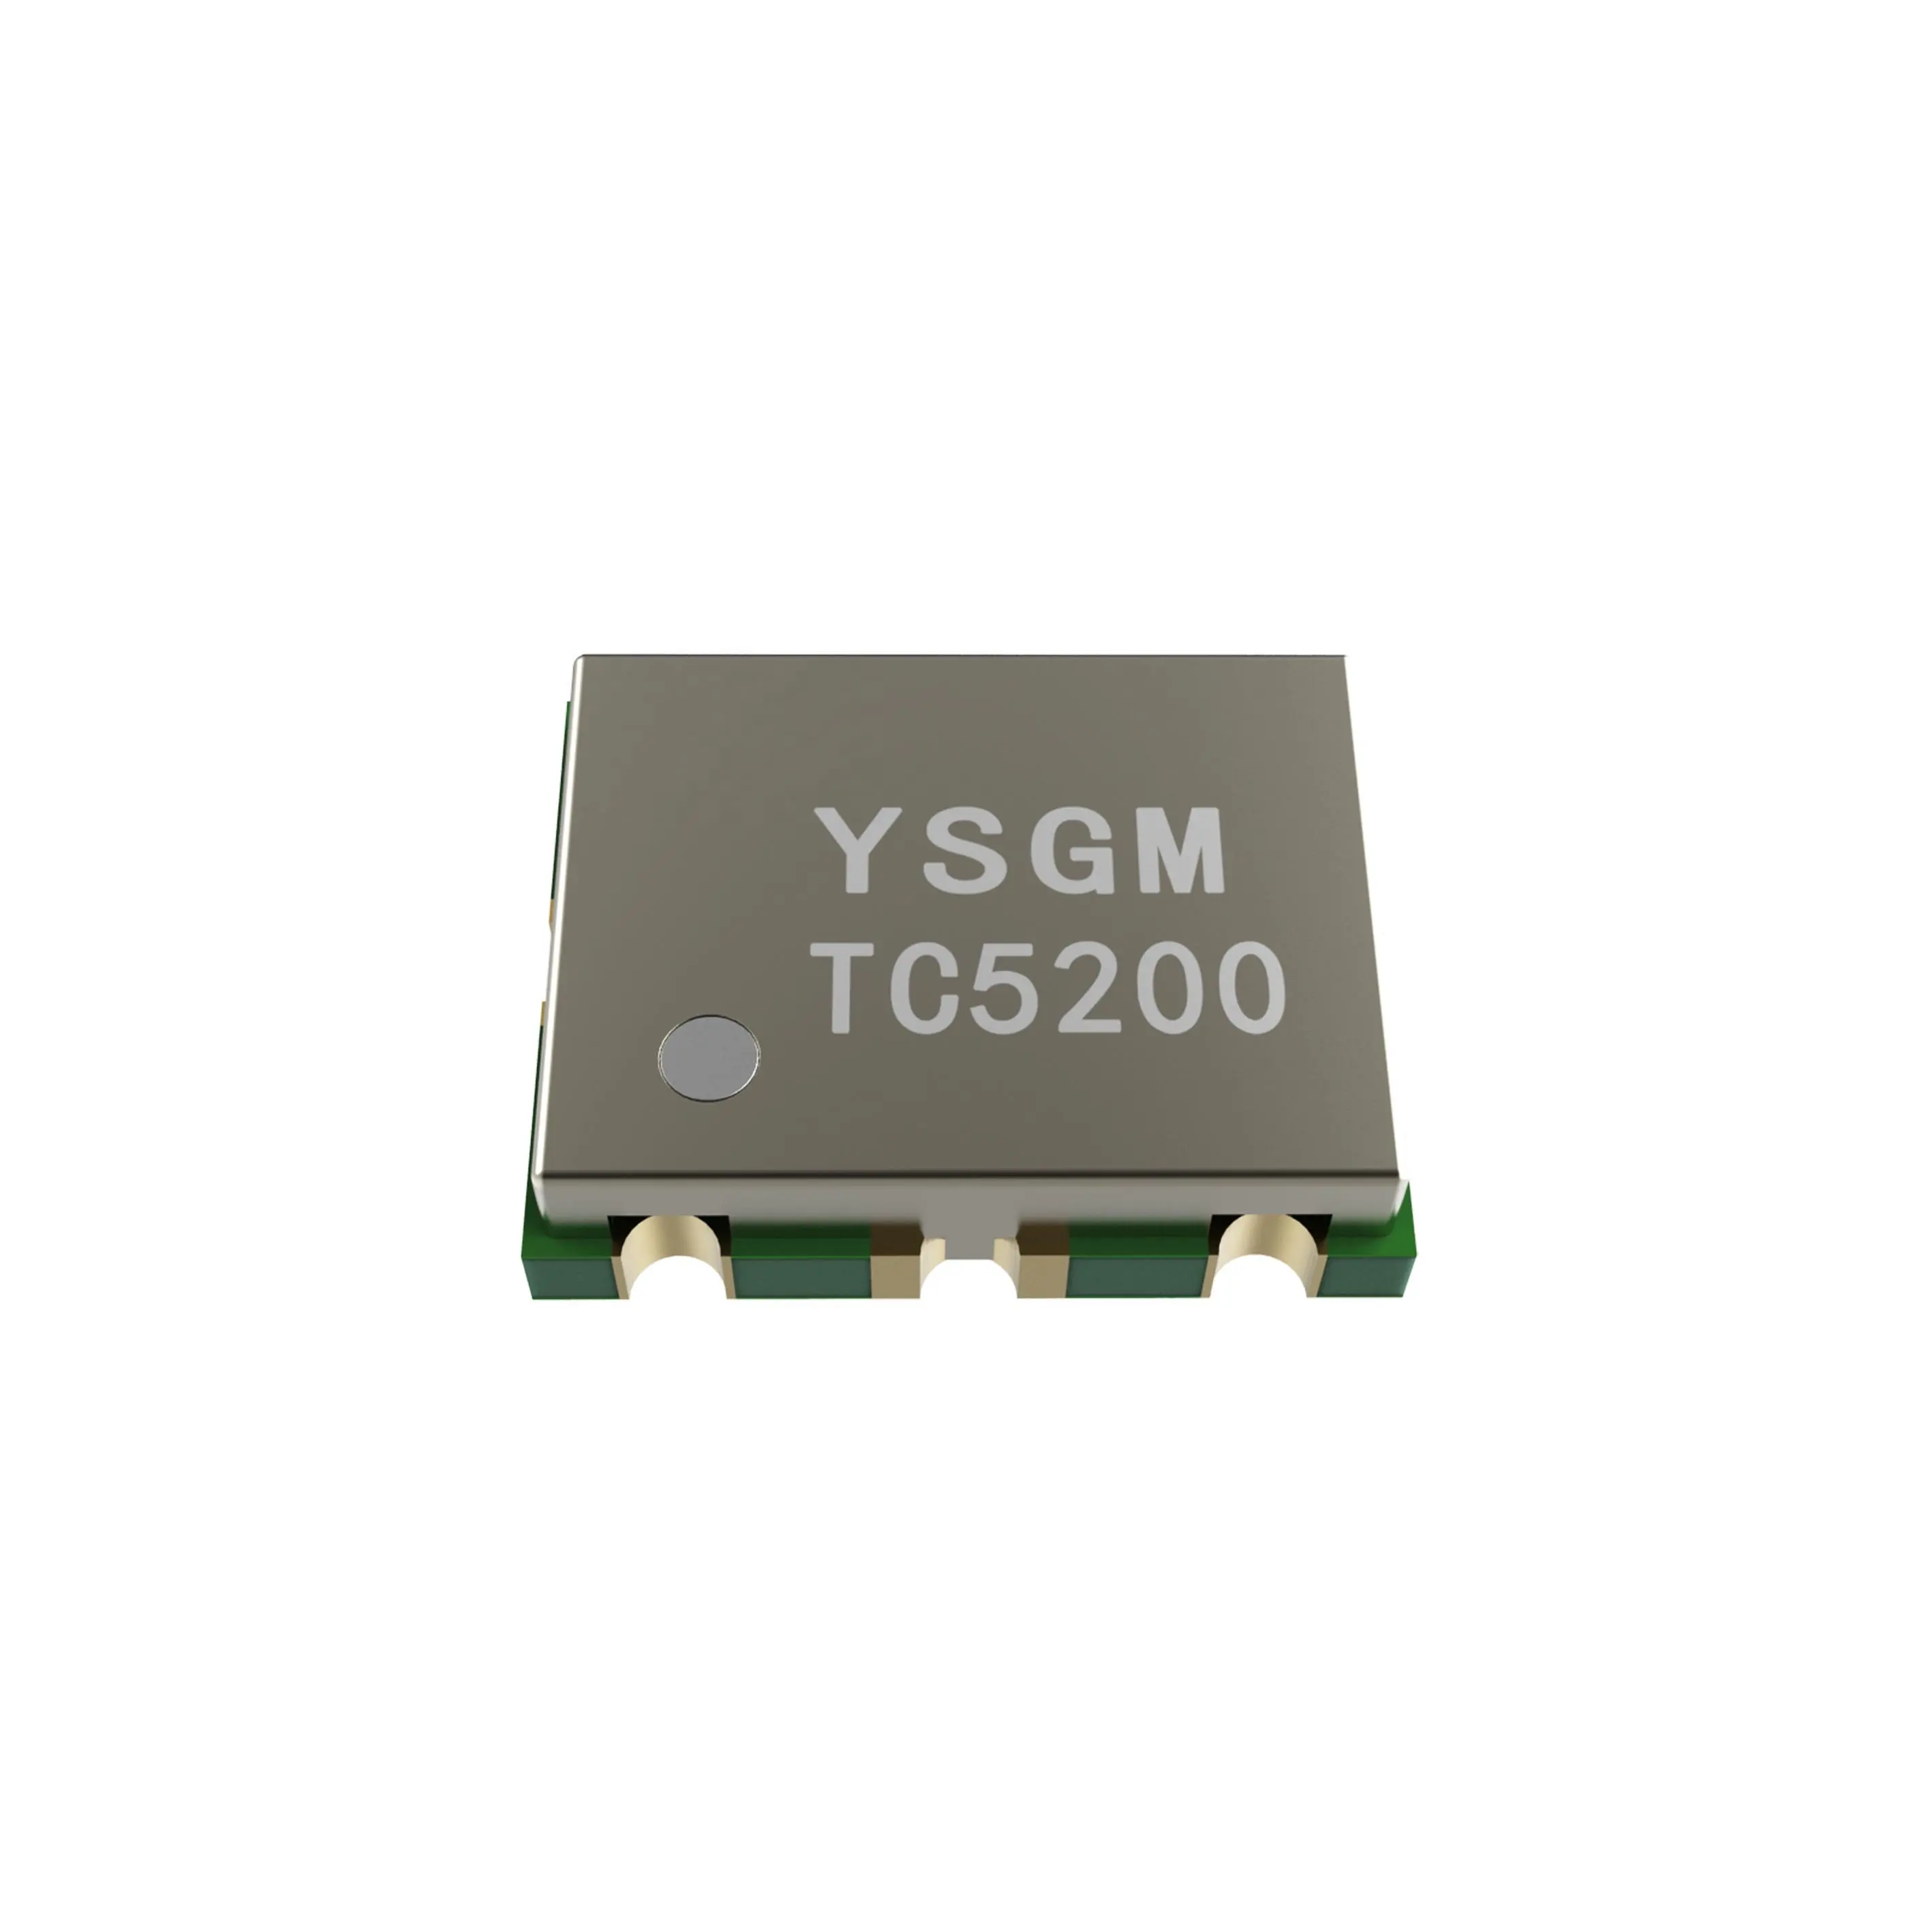 SZHUASHI Original 8dBm VCO 4950MHz-5550MHz Voltage Controlled Oscillator chip for Integrated Circuits